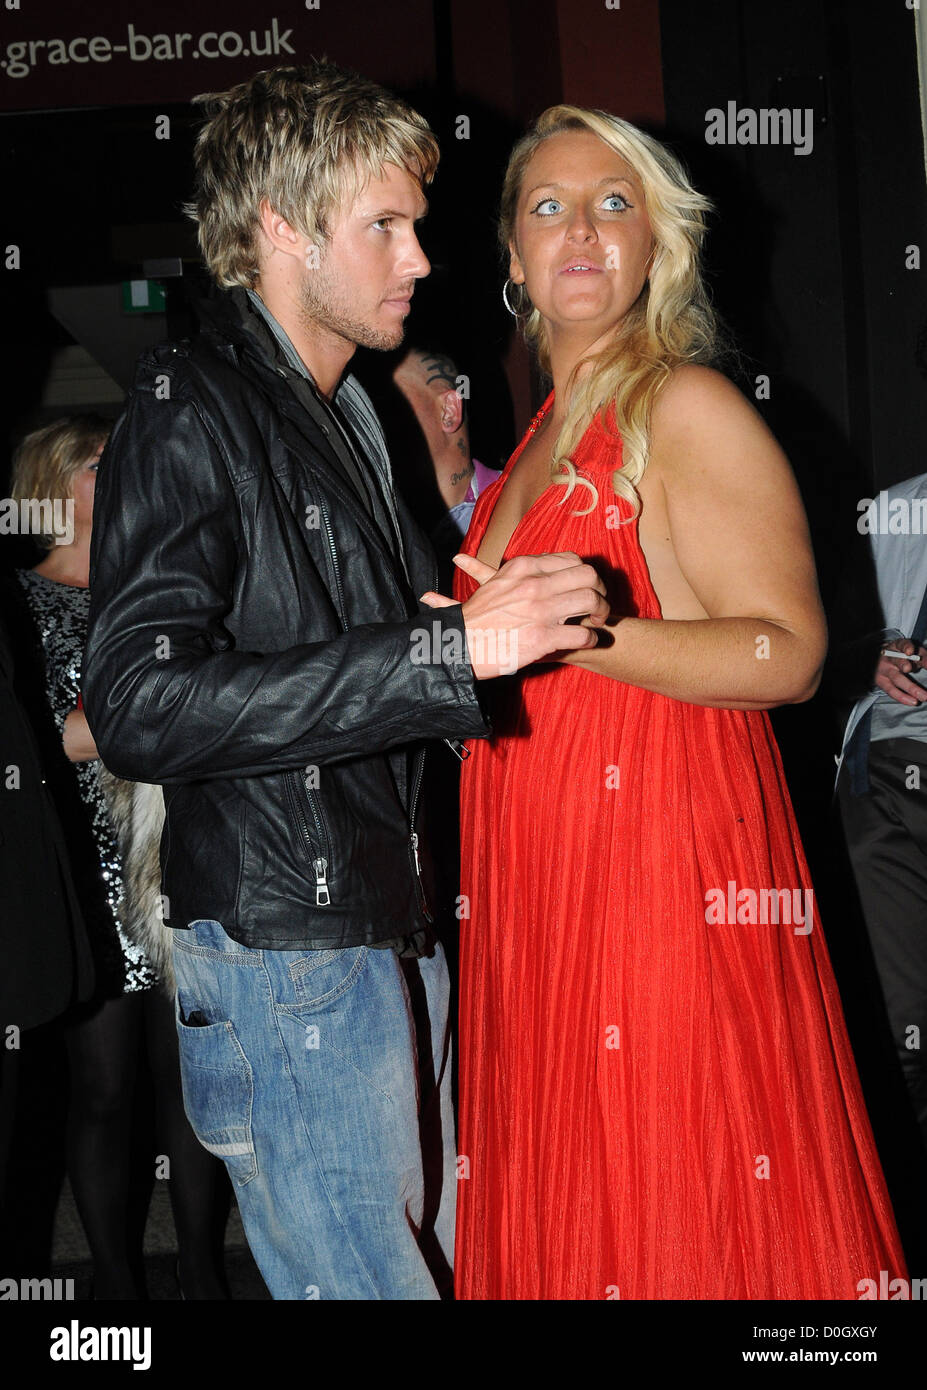 Josie Gibson and John James The Big Brother 11 wrap party held at Grace ...